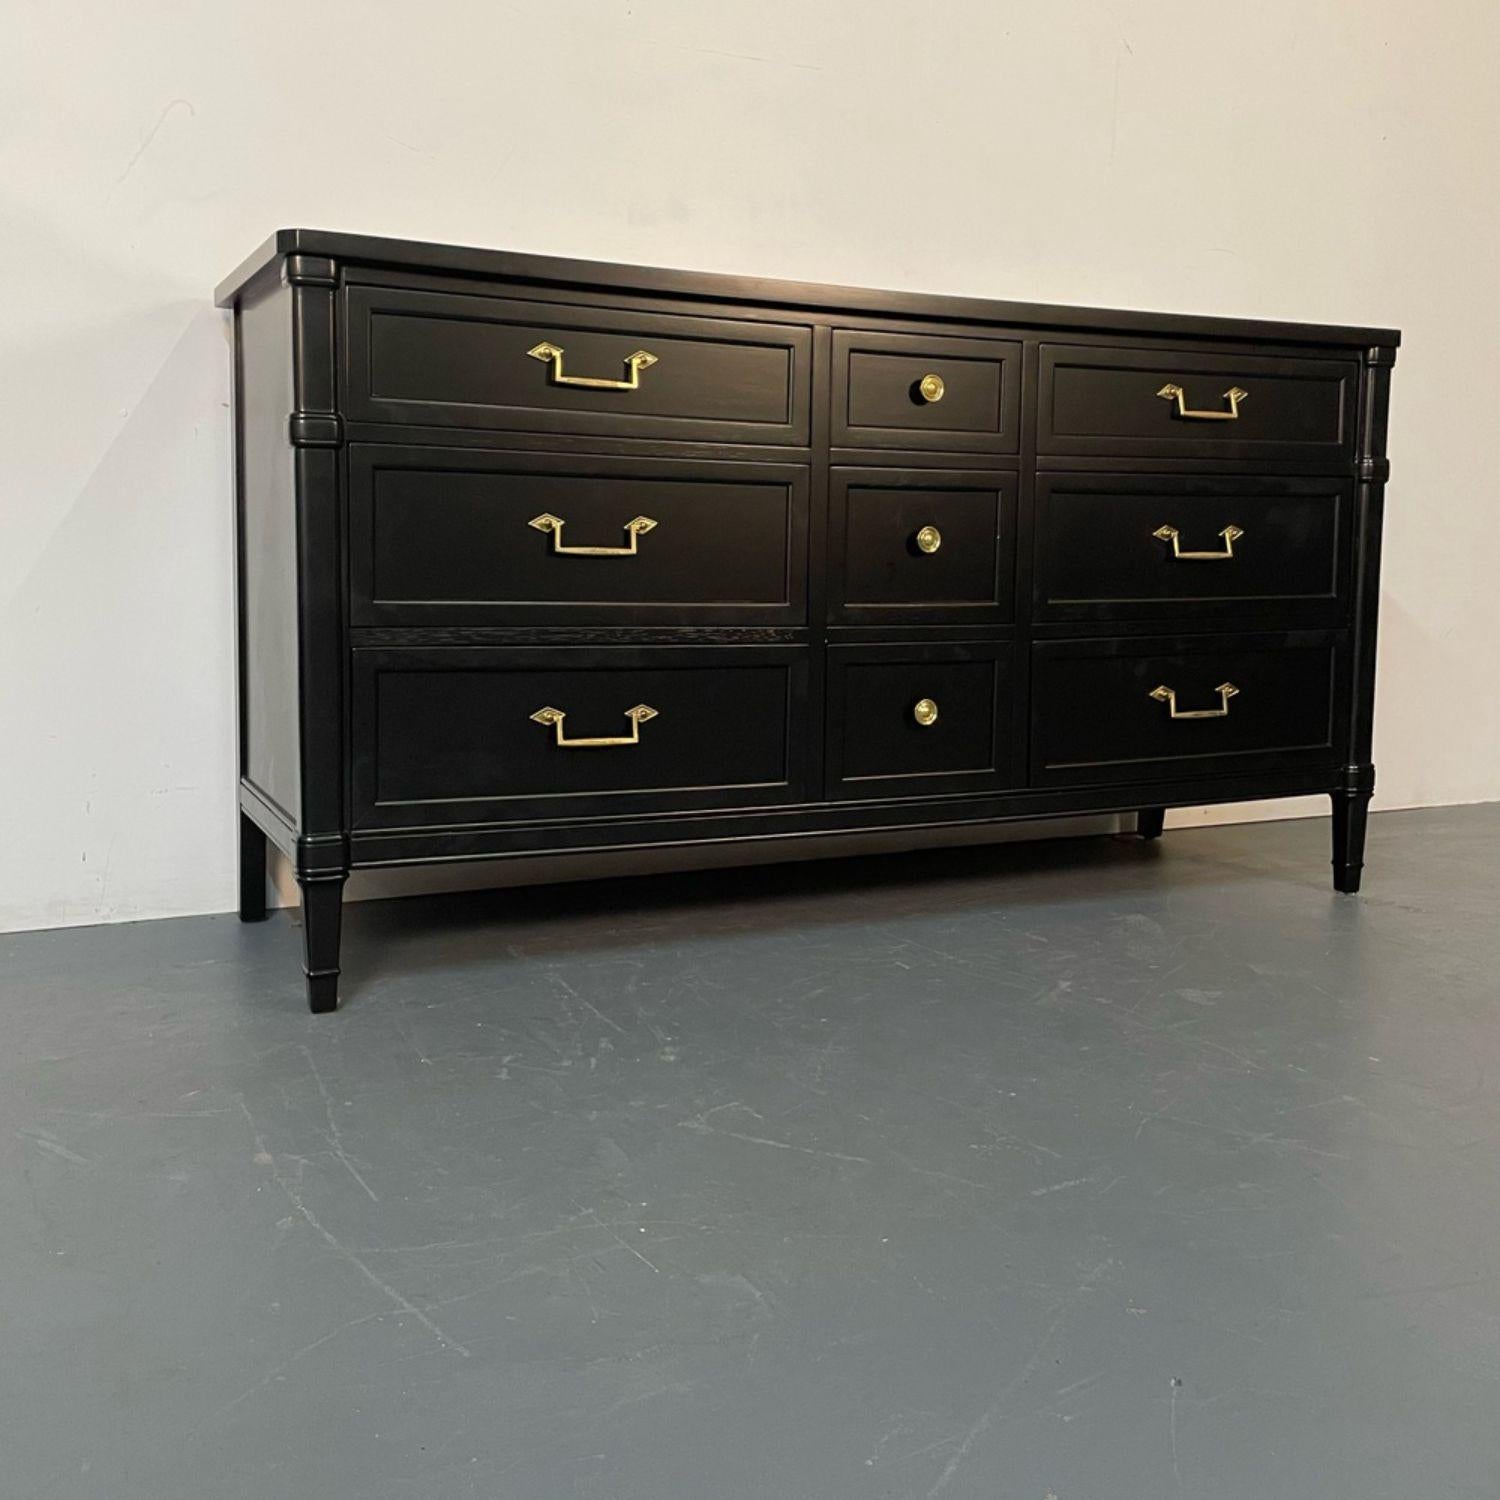 Contemporary Louis XVI Style Black Matte Dresser / Painted Cabinet, Refinished, Brass Handles